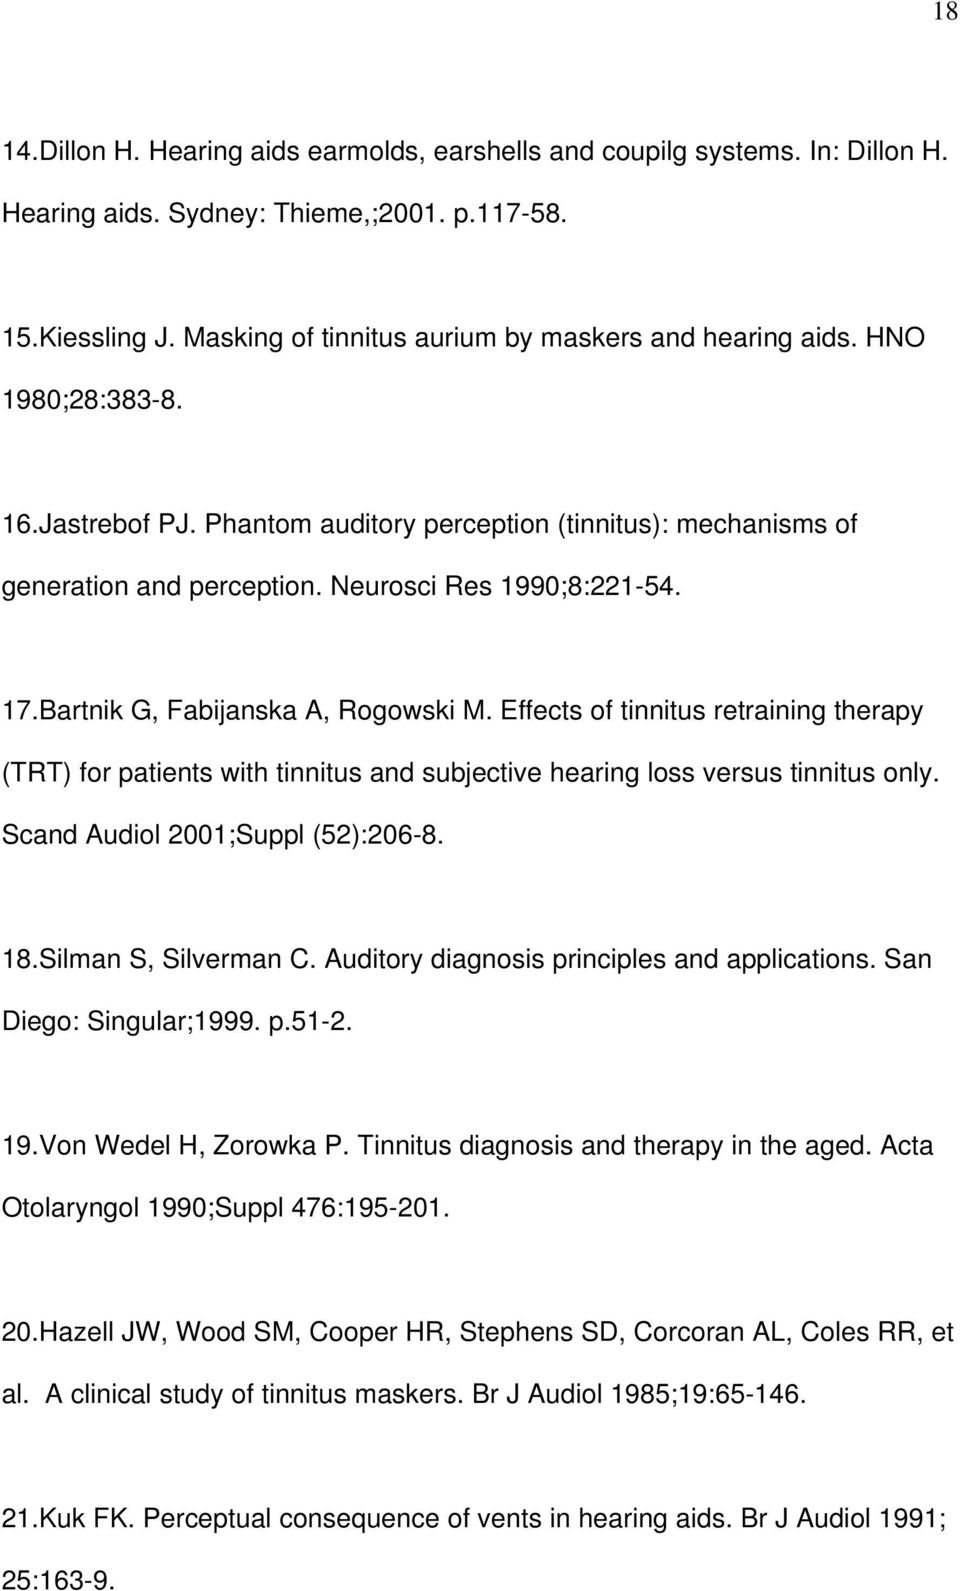 17.Bartnik G, Fabijanska A, Rogowski M. Effects of tinnitus retraining therapy (TRT) for patients with tinnitus and subjective hearing loss versus tinnitus only. Scand Audiol 2001;Suppl (52):206-8.